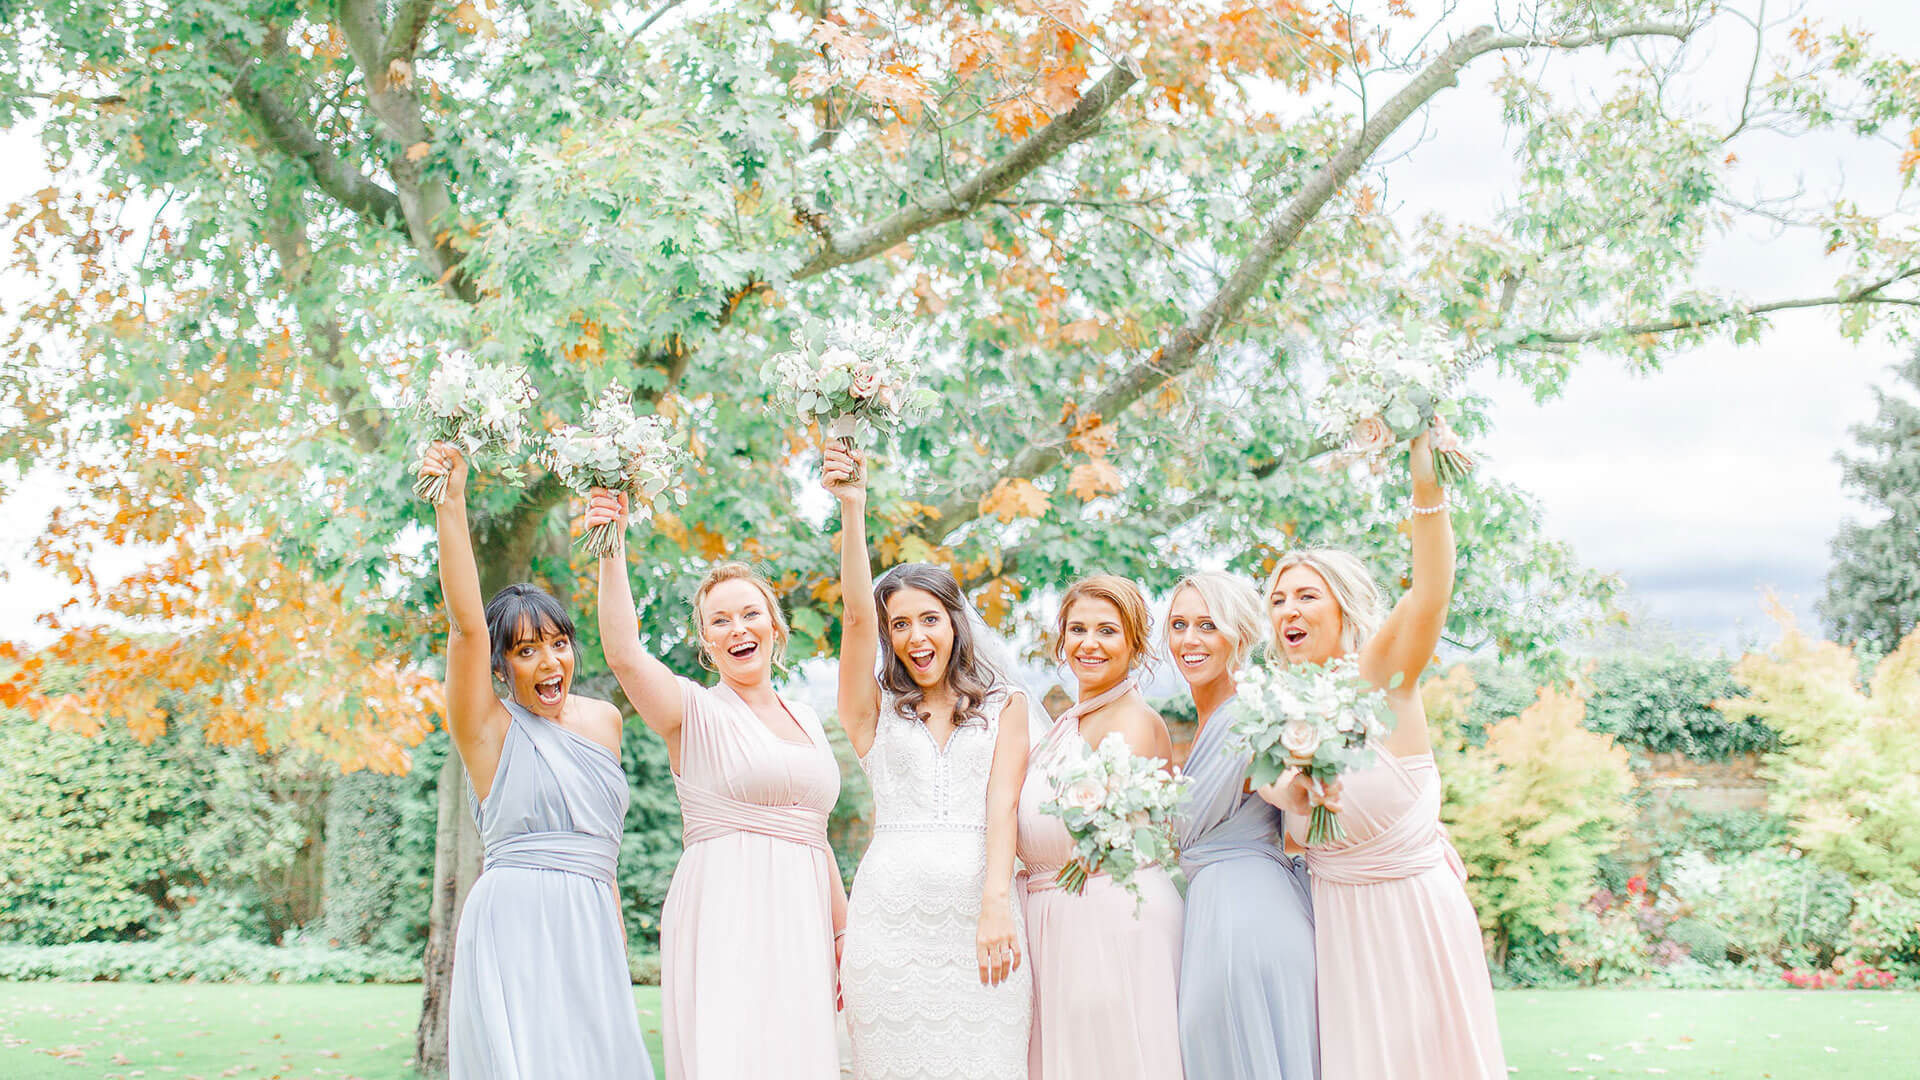 Bridesmaids dressed in pastel shades of pink and lilac - autumn wedding ideas